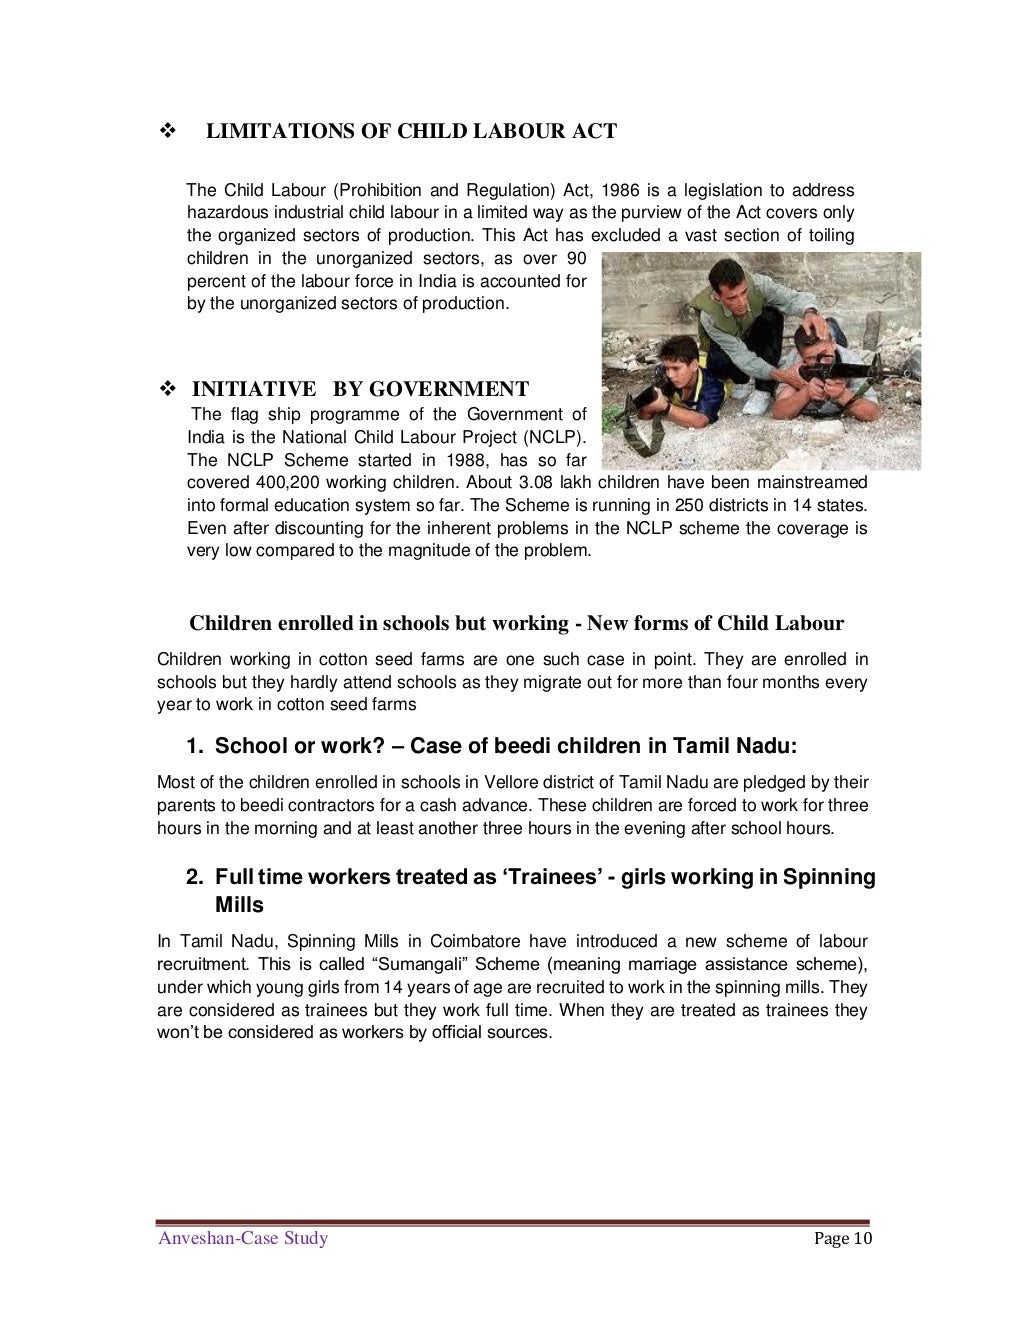 literature review about child labor